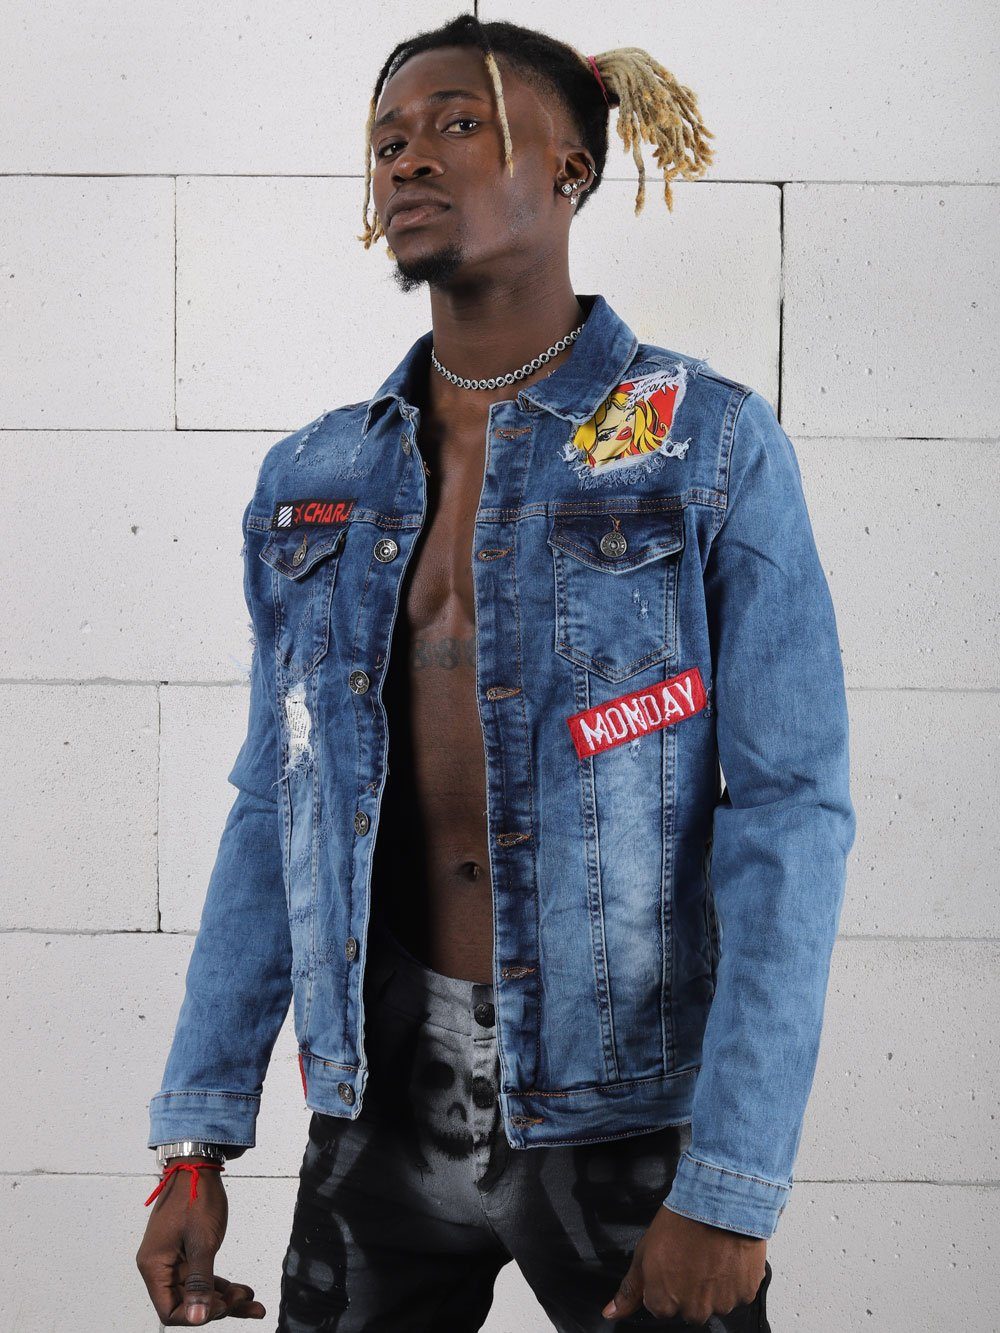 A man wearing a denim jacket with patches in MONDAY streetwear style.